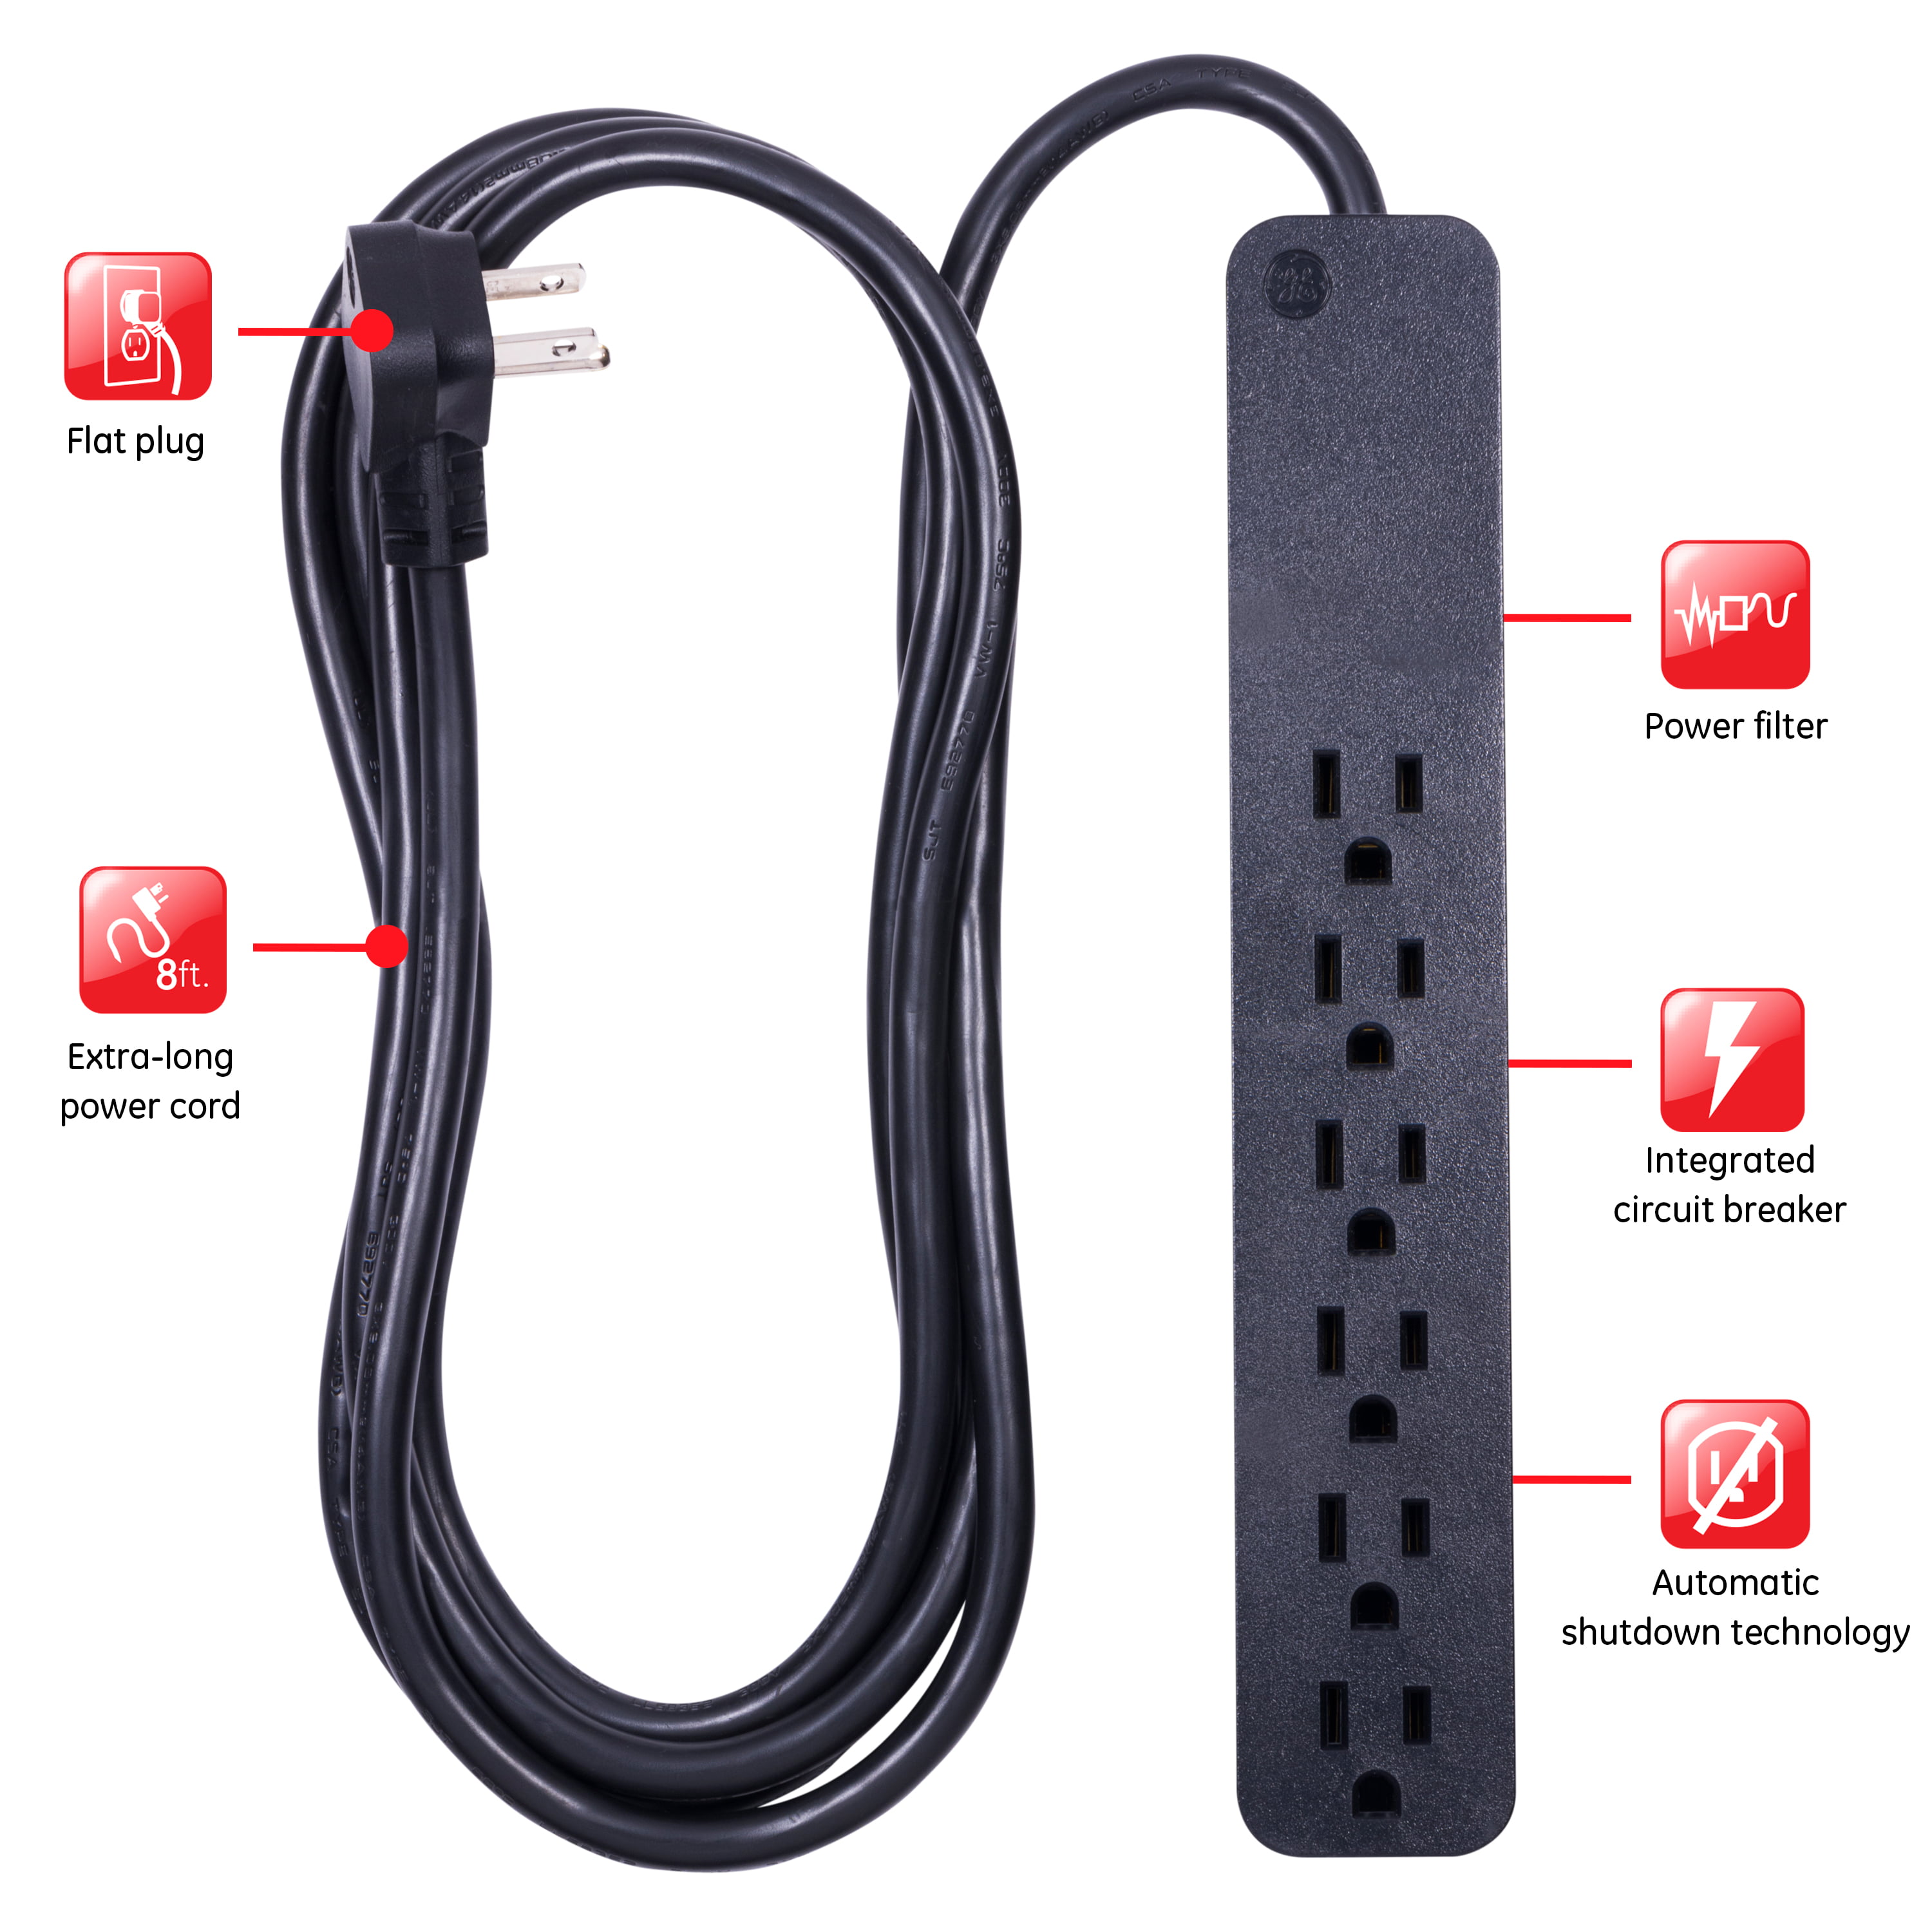 37052 Wall Mount Black Flat Plug 8ft Extra Long Power Cord 6 Outlets GE Power Strip Surge Protector 